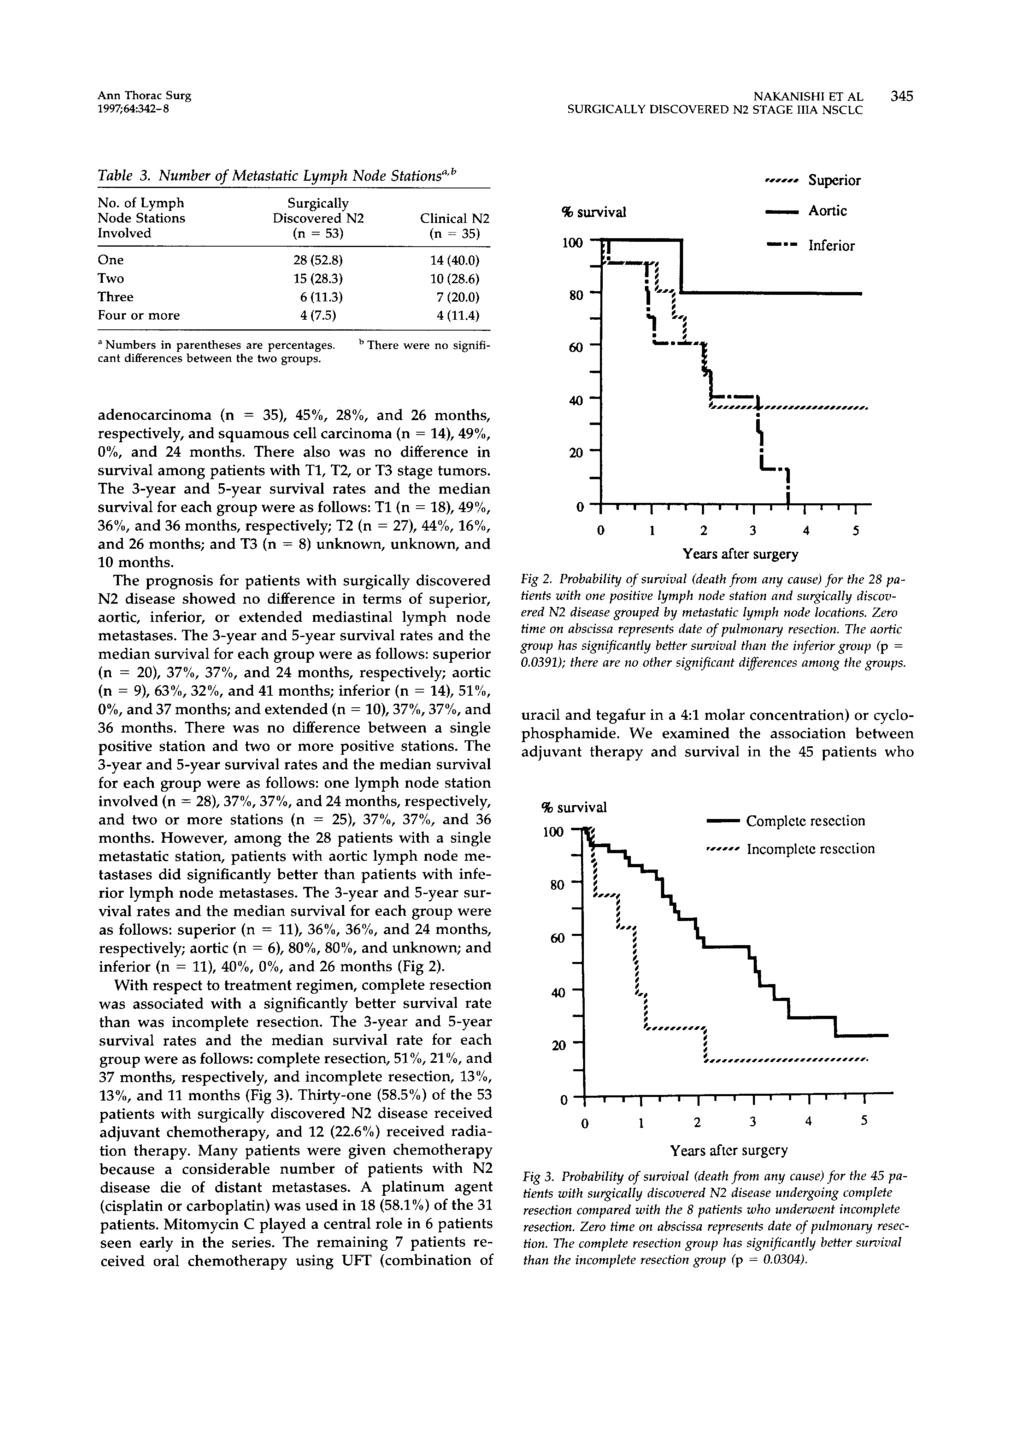 Ann Thorac Surg NAKANISHI ET AL 345 1997;64:342-8 SURGICALLY DISCOVERED N2 STAGE IIIA NSCLC Table 3. Number of Metastatic Lymph Node Stations "b No.